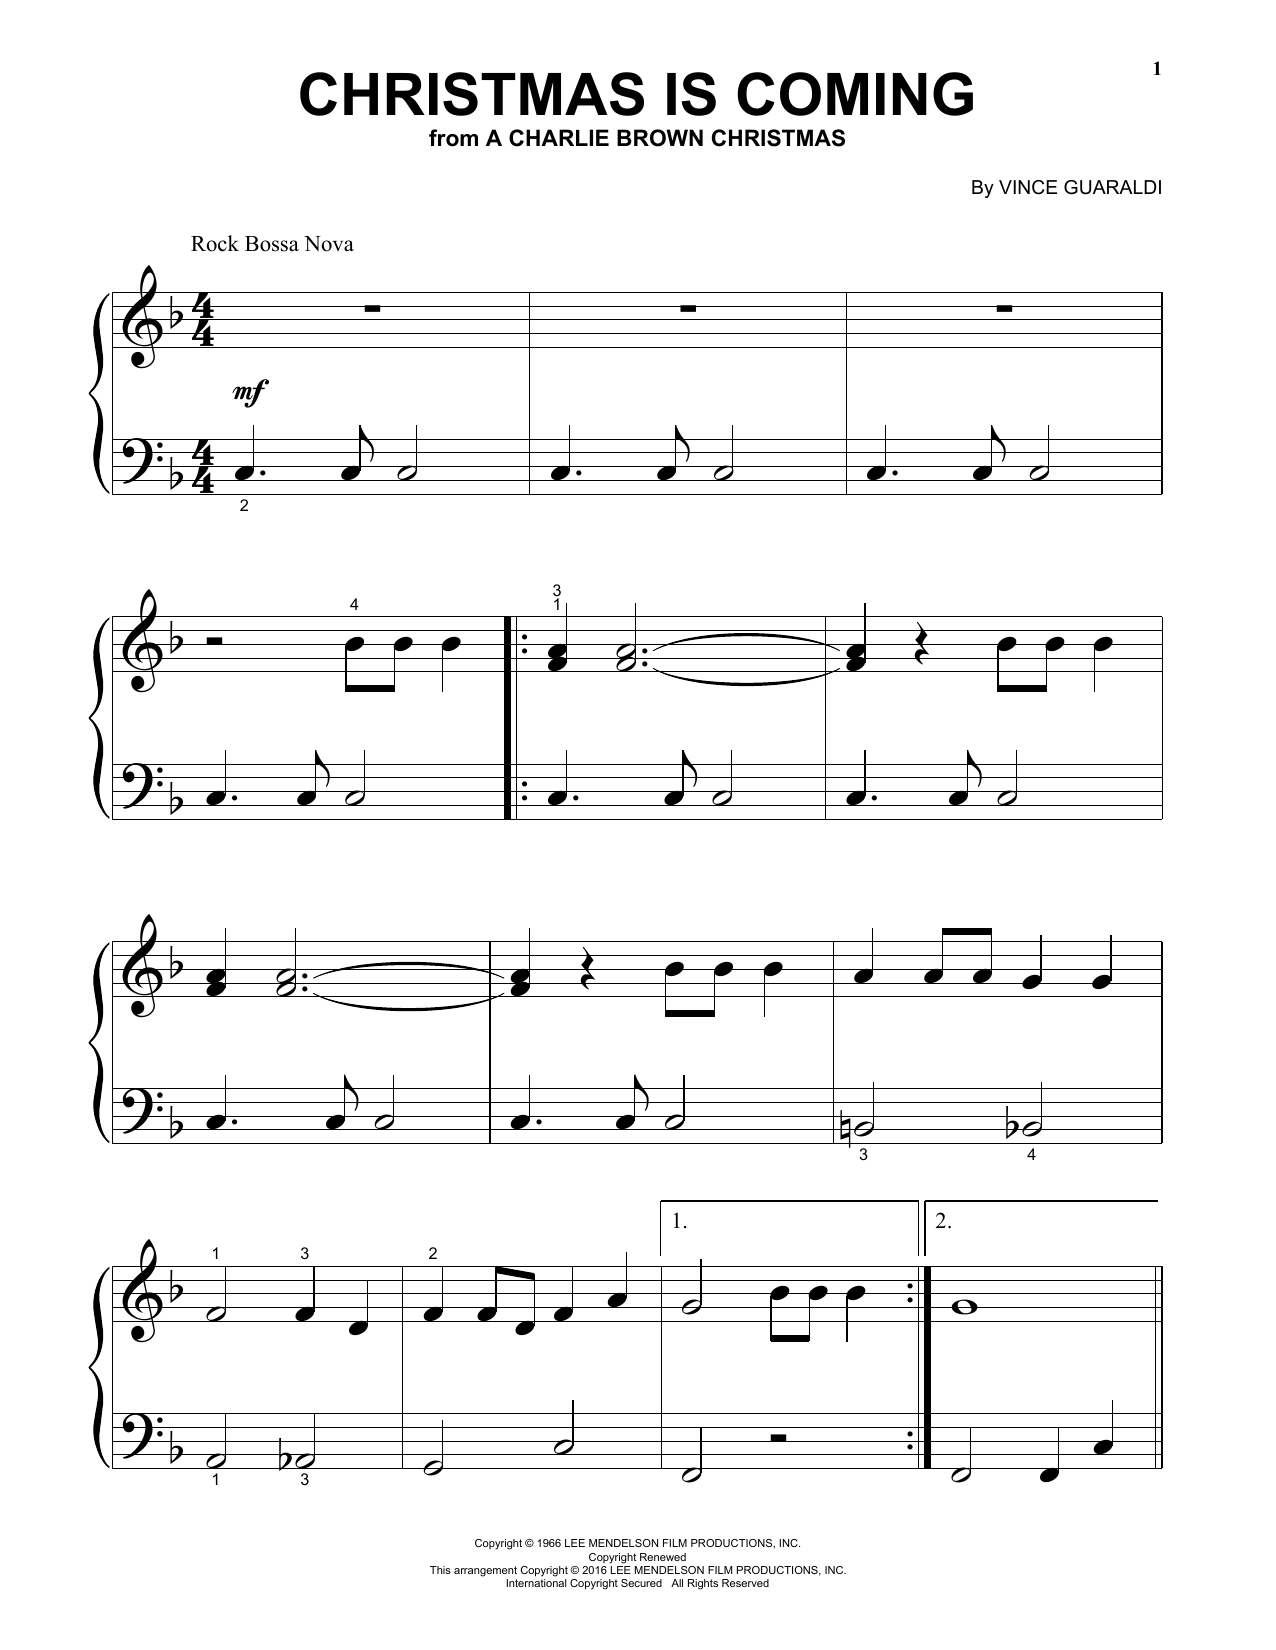 Download Vince Guaraldi Christmas Is Coming Sheet Music